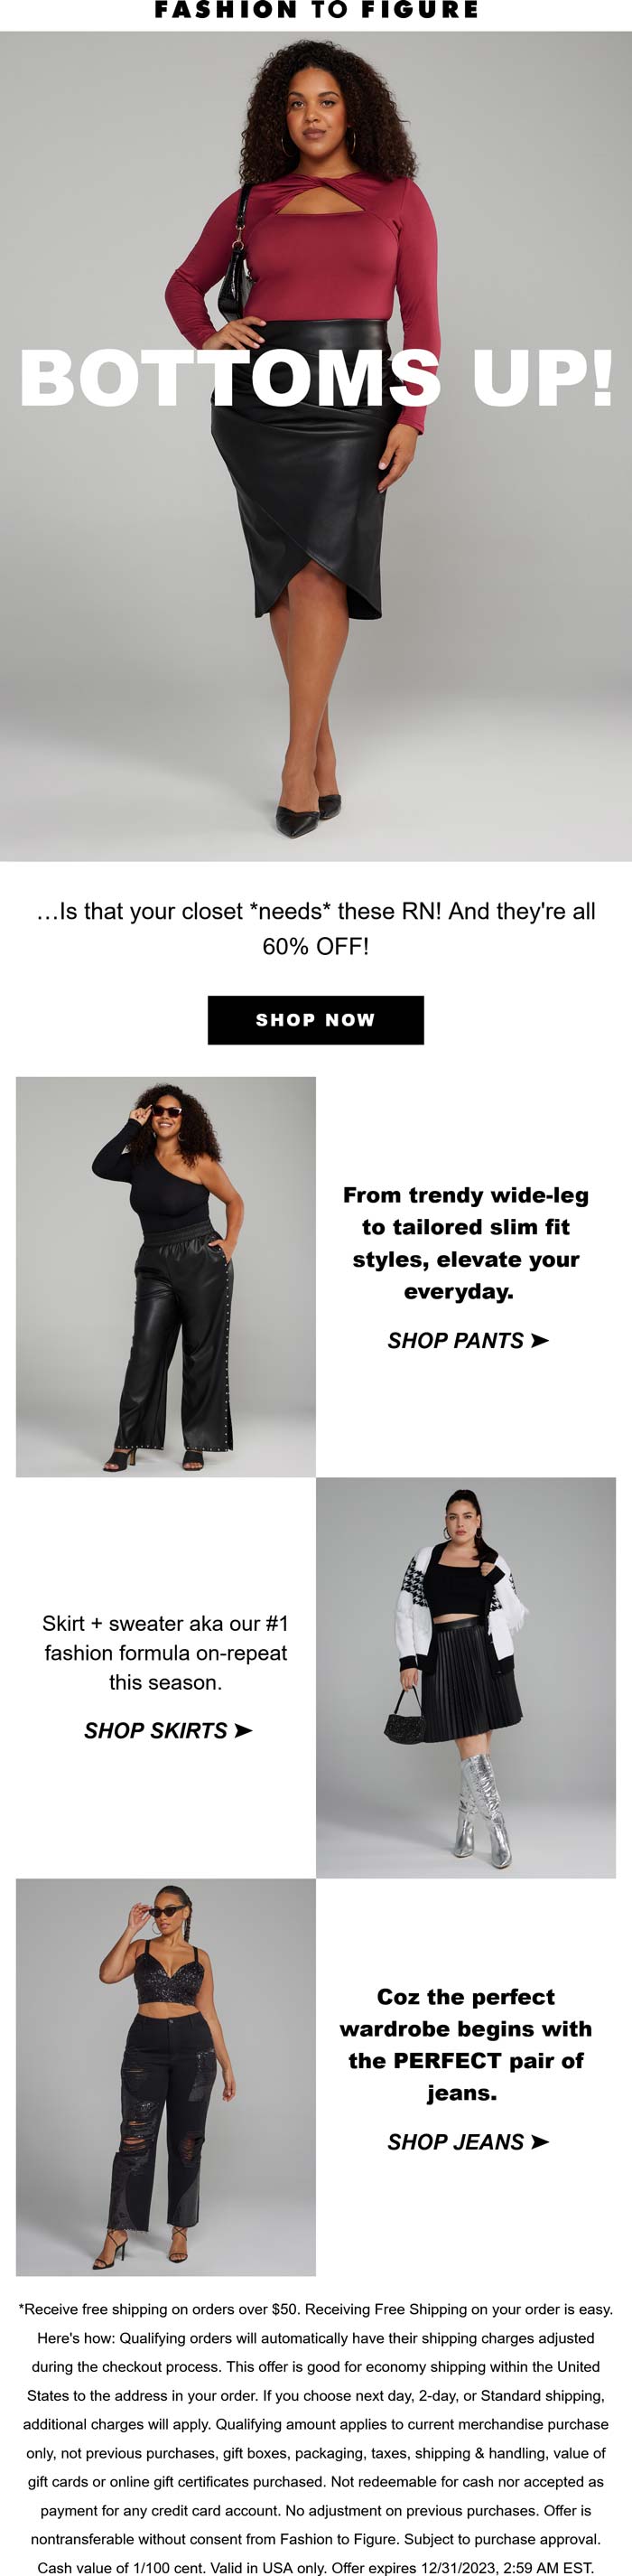 Fashion to Figure stores Coupon  60% off bottoms at Fashion to Figure #fashiontofigure 